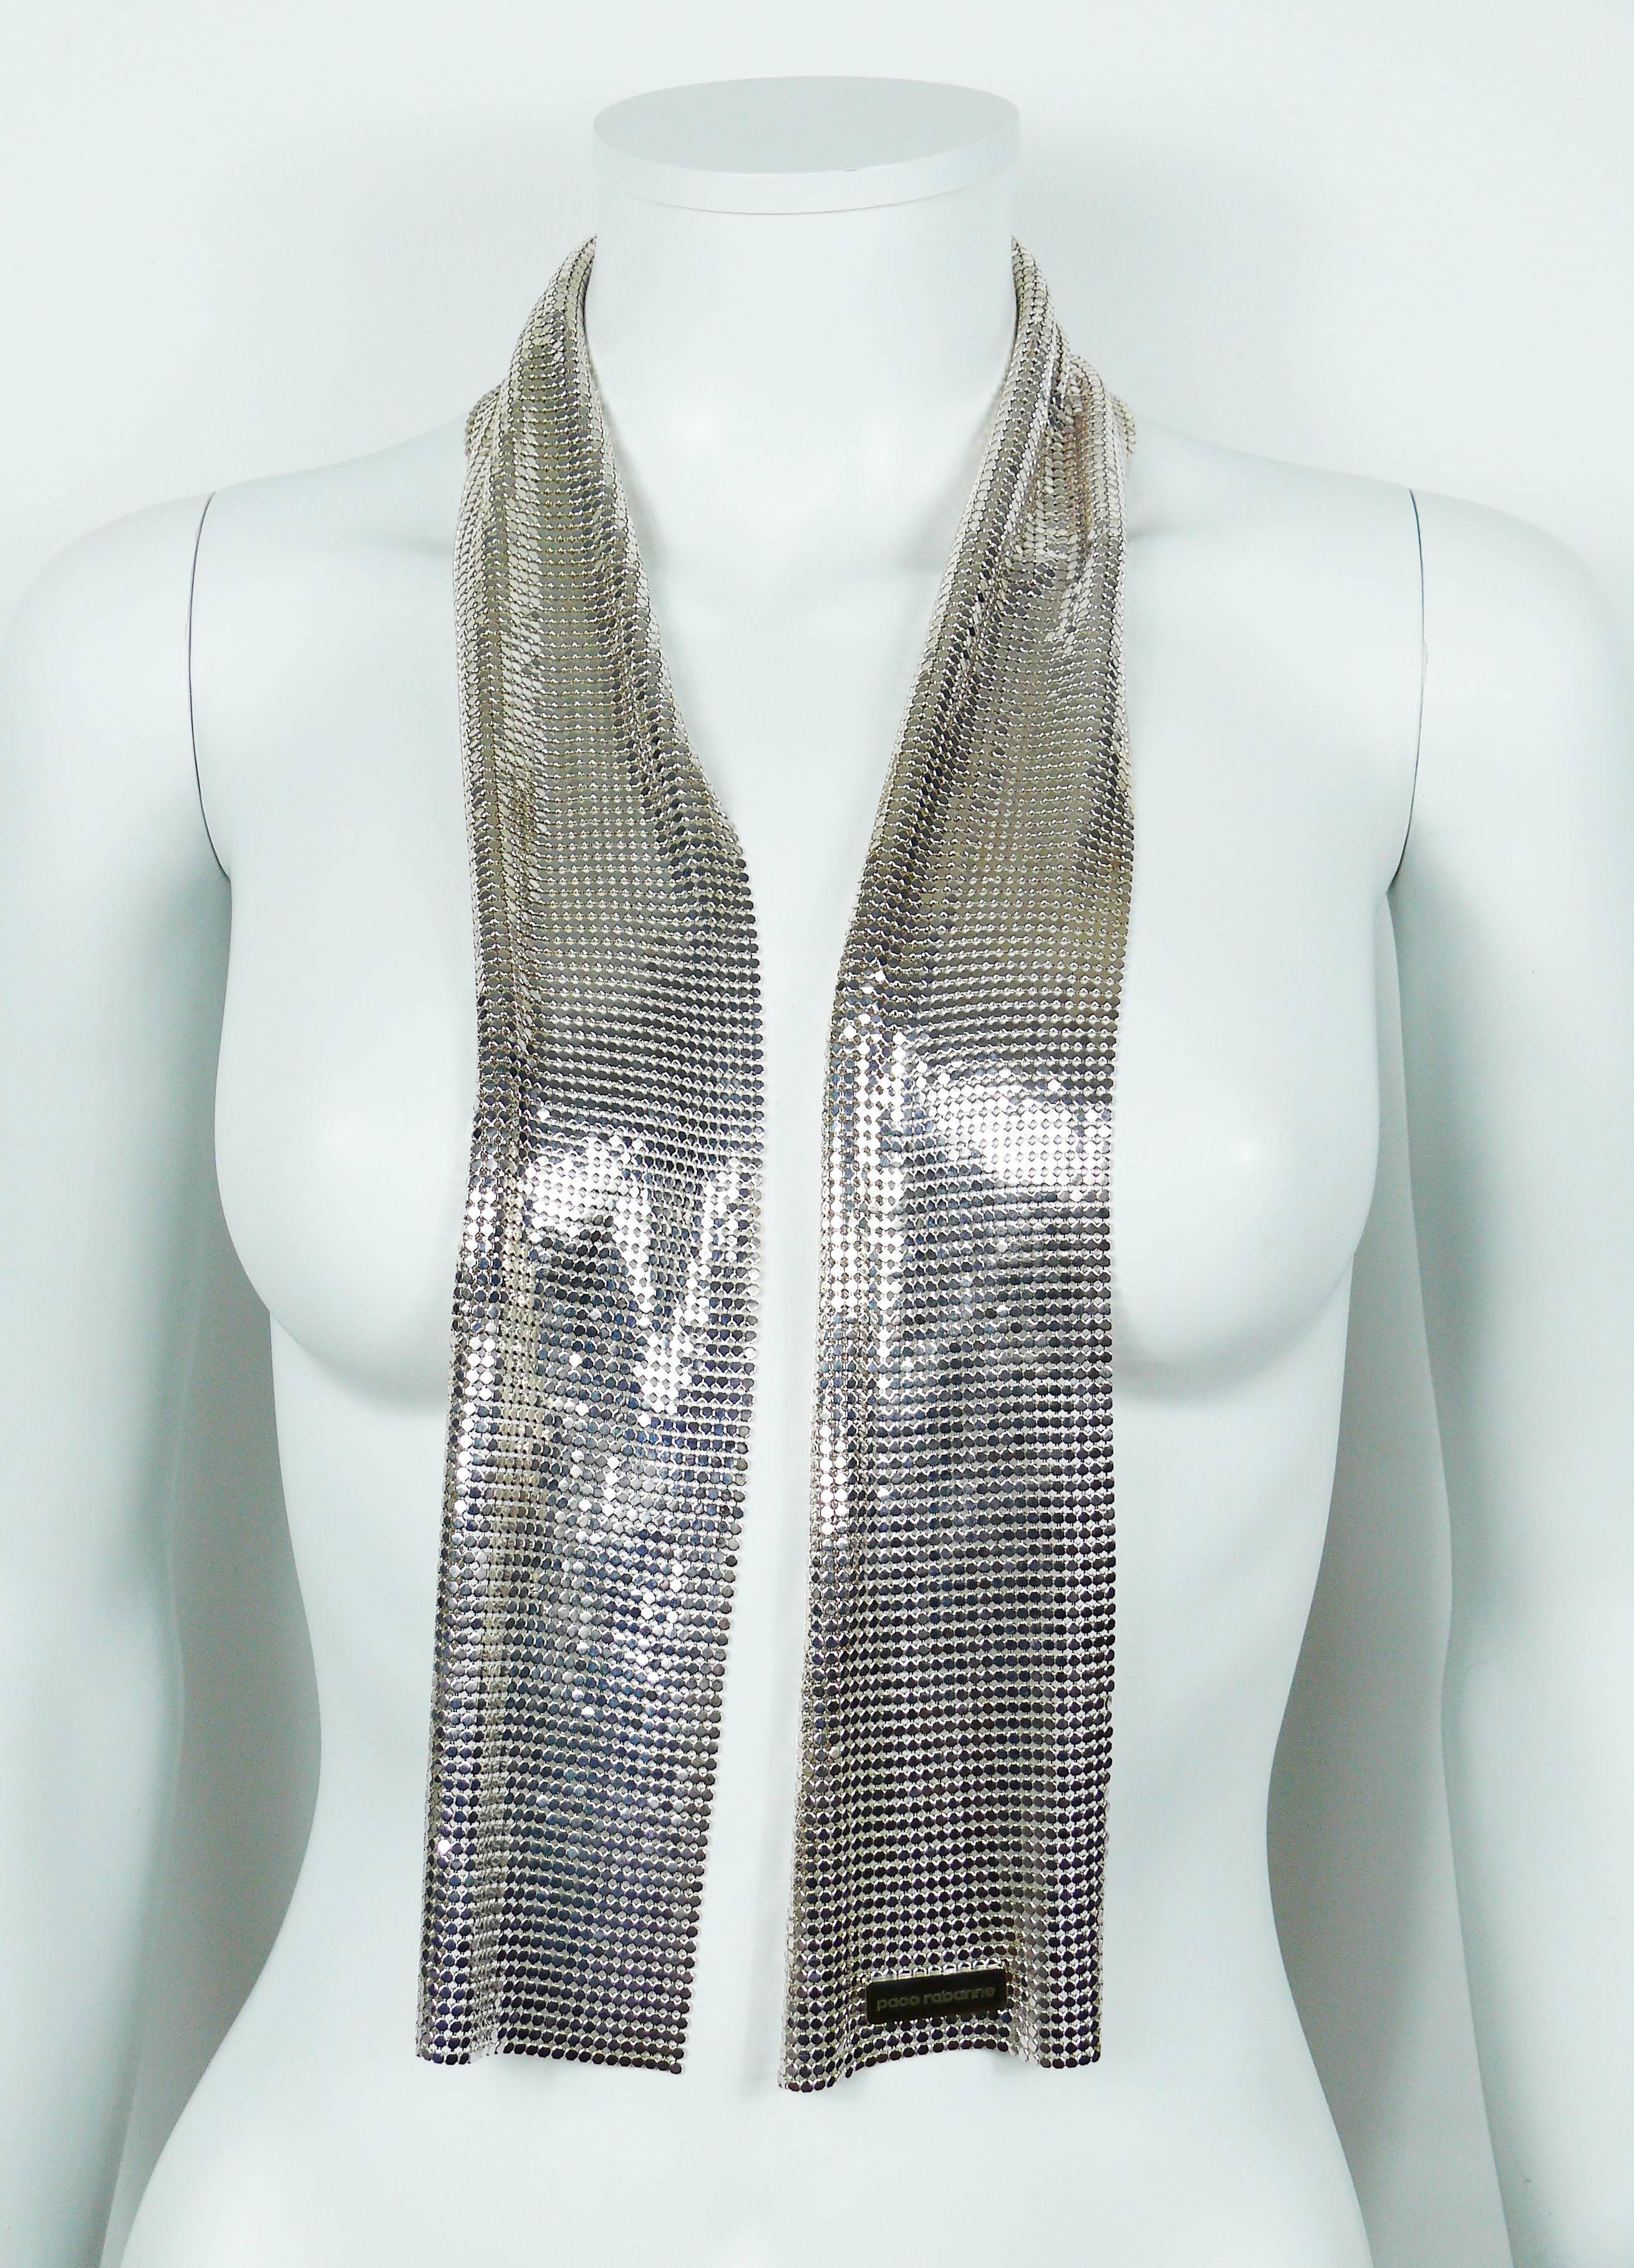 PACO RABANNE vintage silver mesh jersey scarf.

VIP gift.

Marked PACO RABANNE.

Indicative mesaurements : length approx. 102 cm (40.16 inches) / width approx. 8 cm (3.15 inches).

Comes with original box (used).

JEWELRY CONDITION CHART
- New or